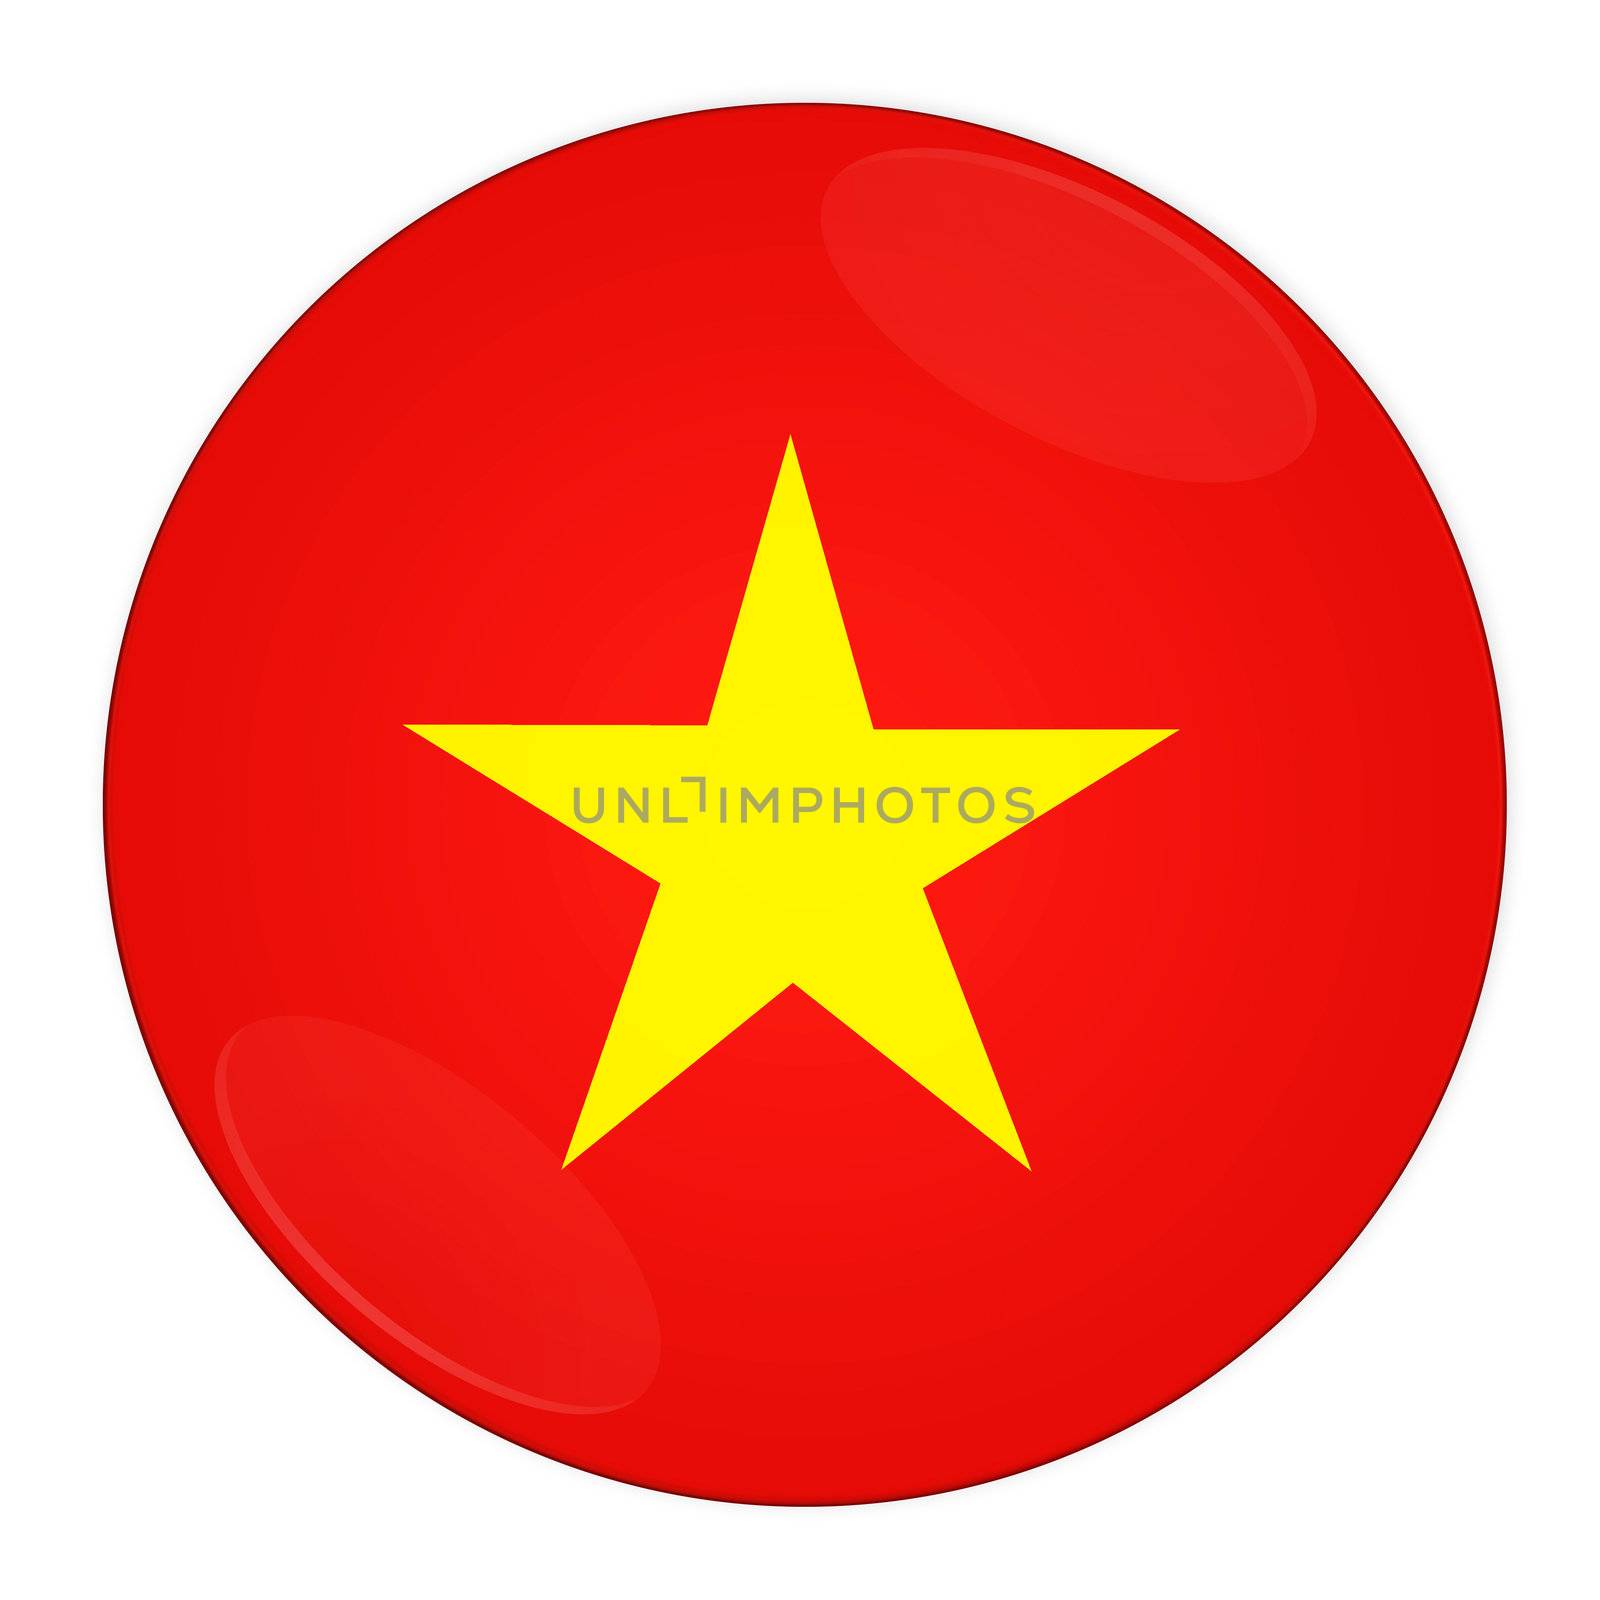 Abstract illustration: button with flag from Vietnam country